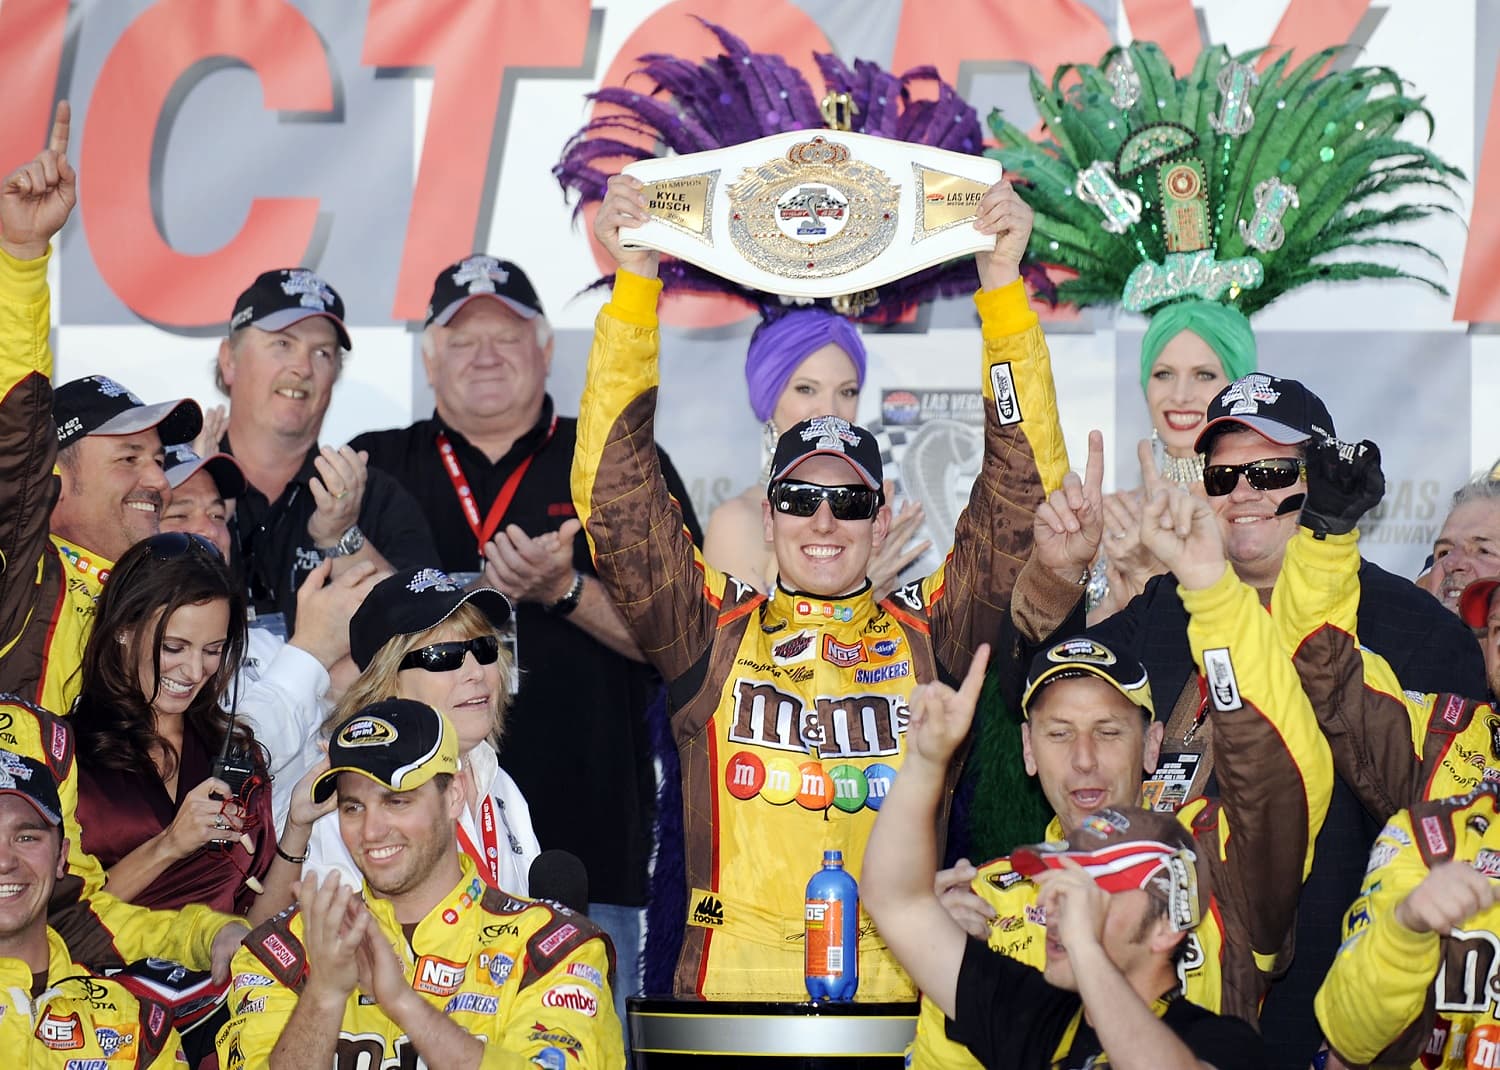 NASCAR star Kyle Busch celebrates in Victory Lane after winning the Shelby 427 at Las Vegas Motor Speedway on March 1, 2009. | Rusty Jarrett/Getty Images for NASCAR